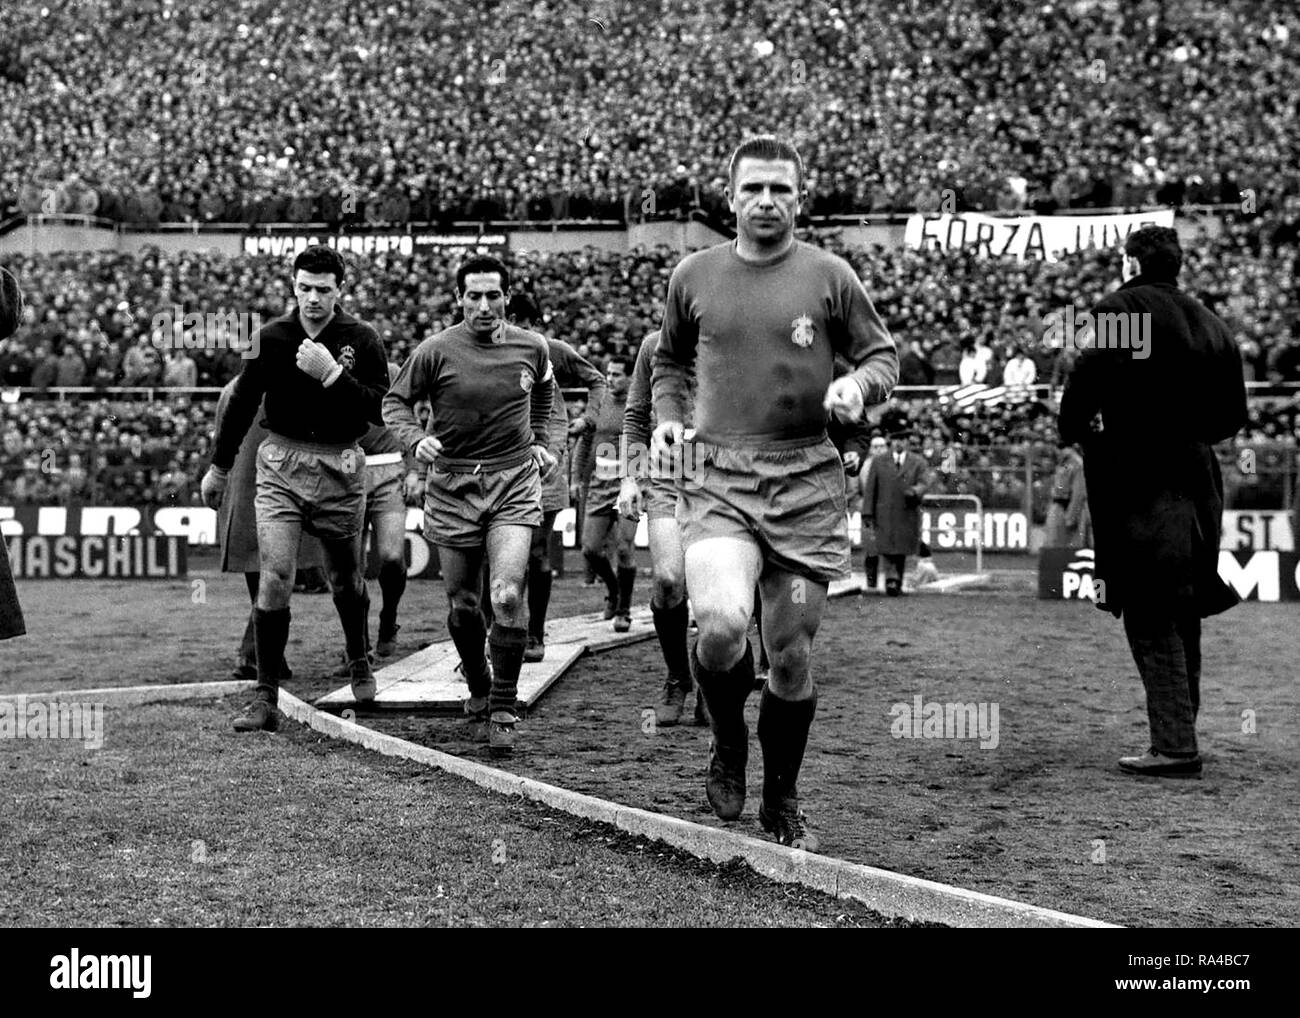 From left to right: Real Madrid C.F.'s footballers José Araquistáinin, Francisco Gento and Ferenc Puskás come back to the field for the 2nd half of their victorius away match versus Juventus F.C. (0-1), 1st leg of the 1961–62 European Cup quarter-finals. Stock Photo